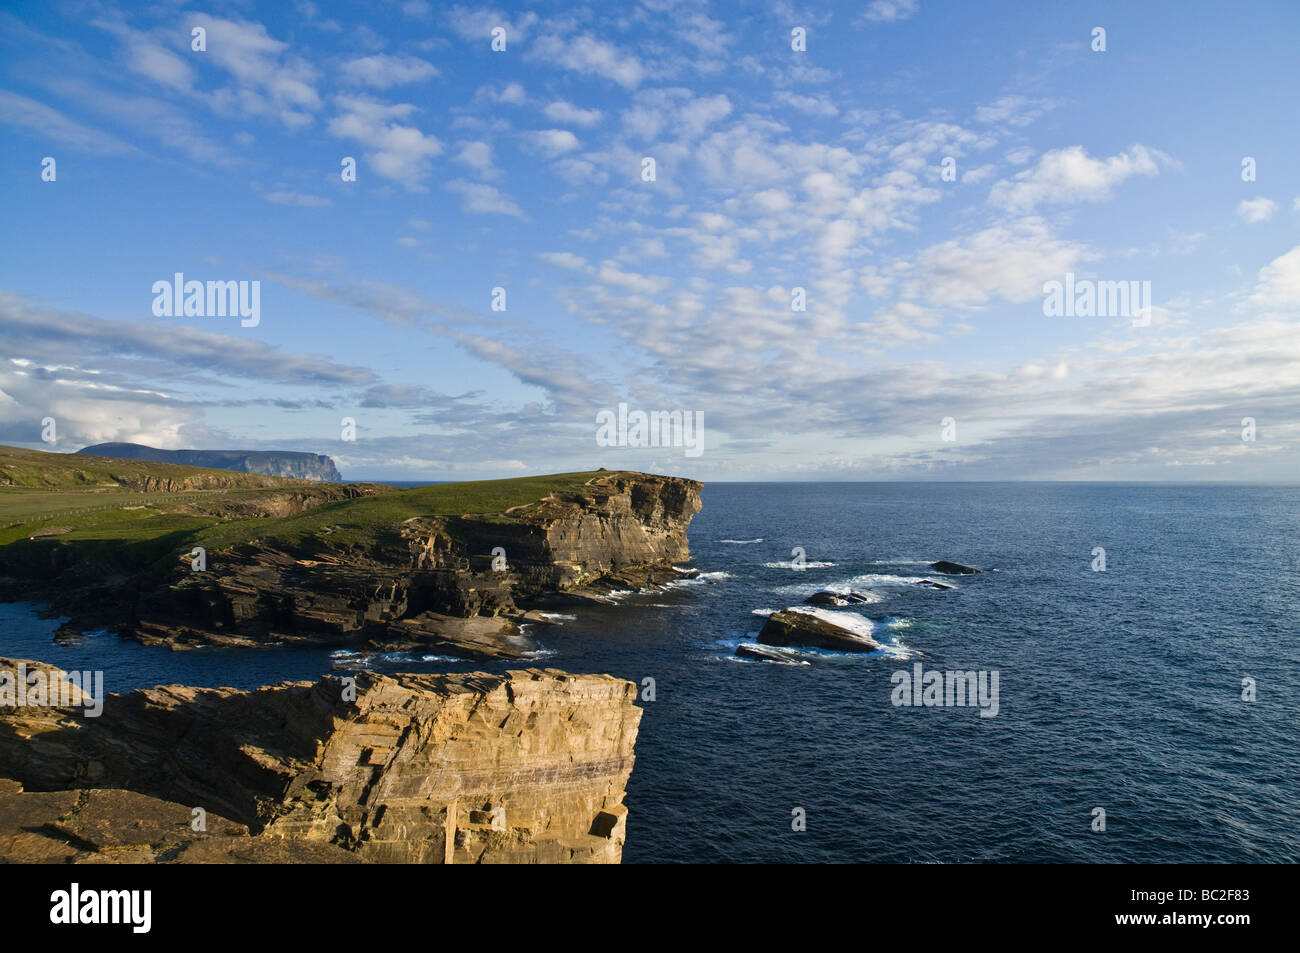 dh Brough of Bigging YESNABY ORKNEY West coast seacliff evening Stock Photo